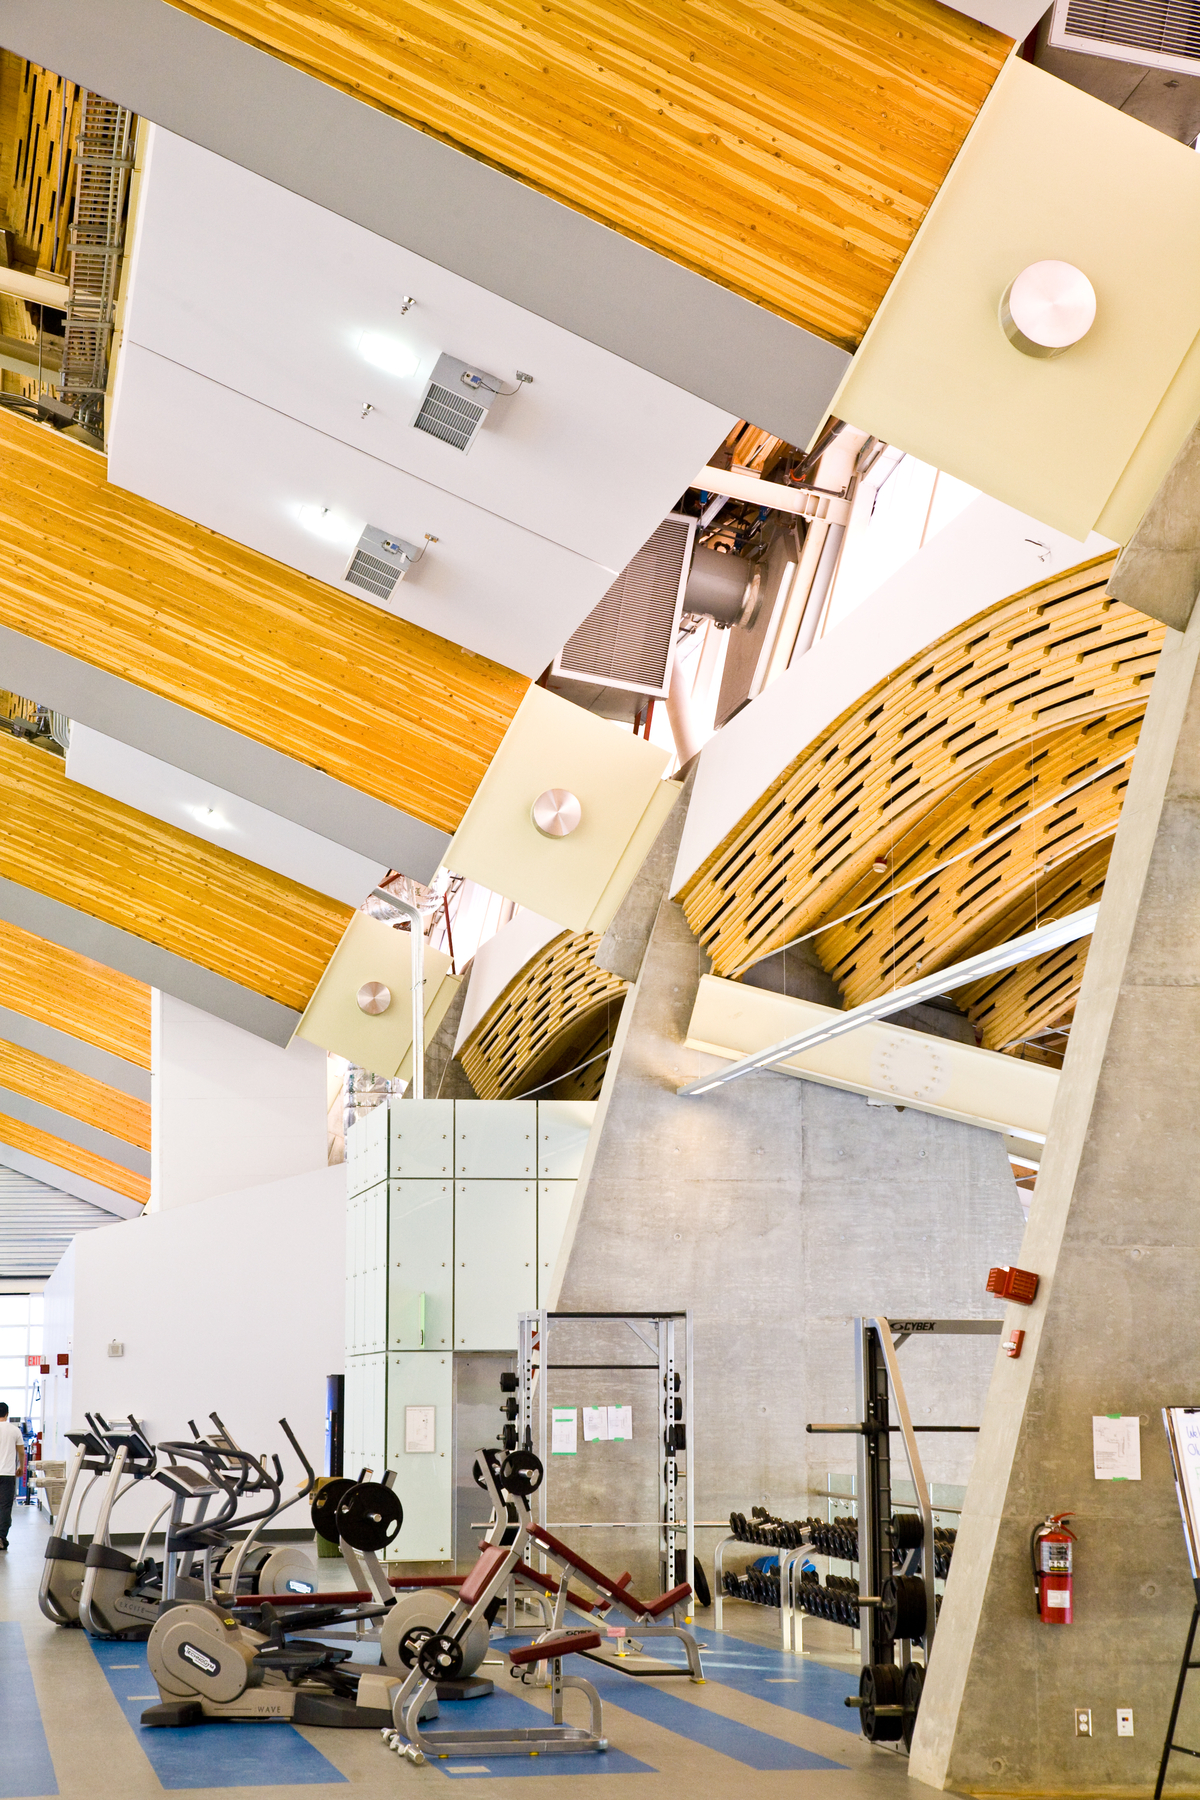 Interior daytime image of glue-laminated timber (Glulam), solid-sawn heavy timbers, and wooden accents as featured in this vibrant interior view of the 33,750 square meter Richmond Olympic Oval